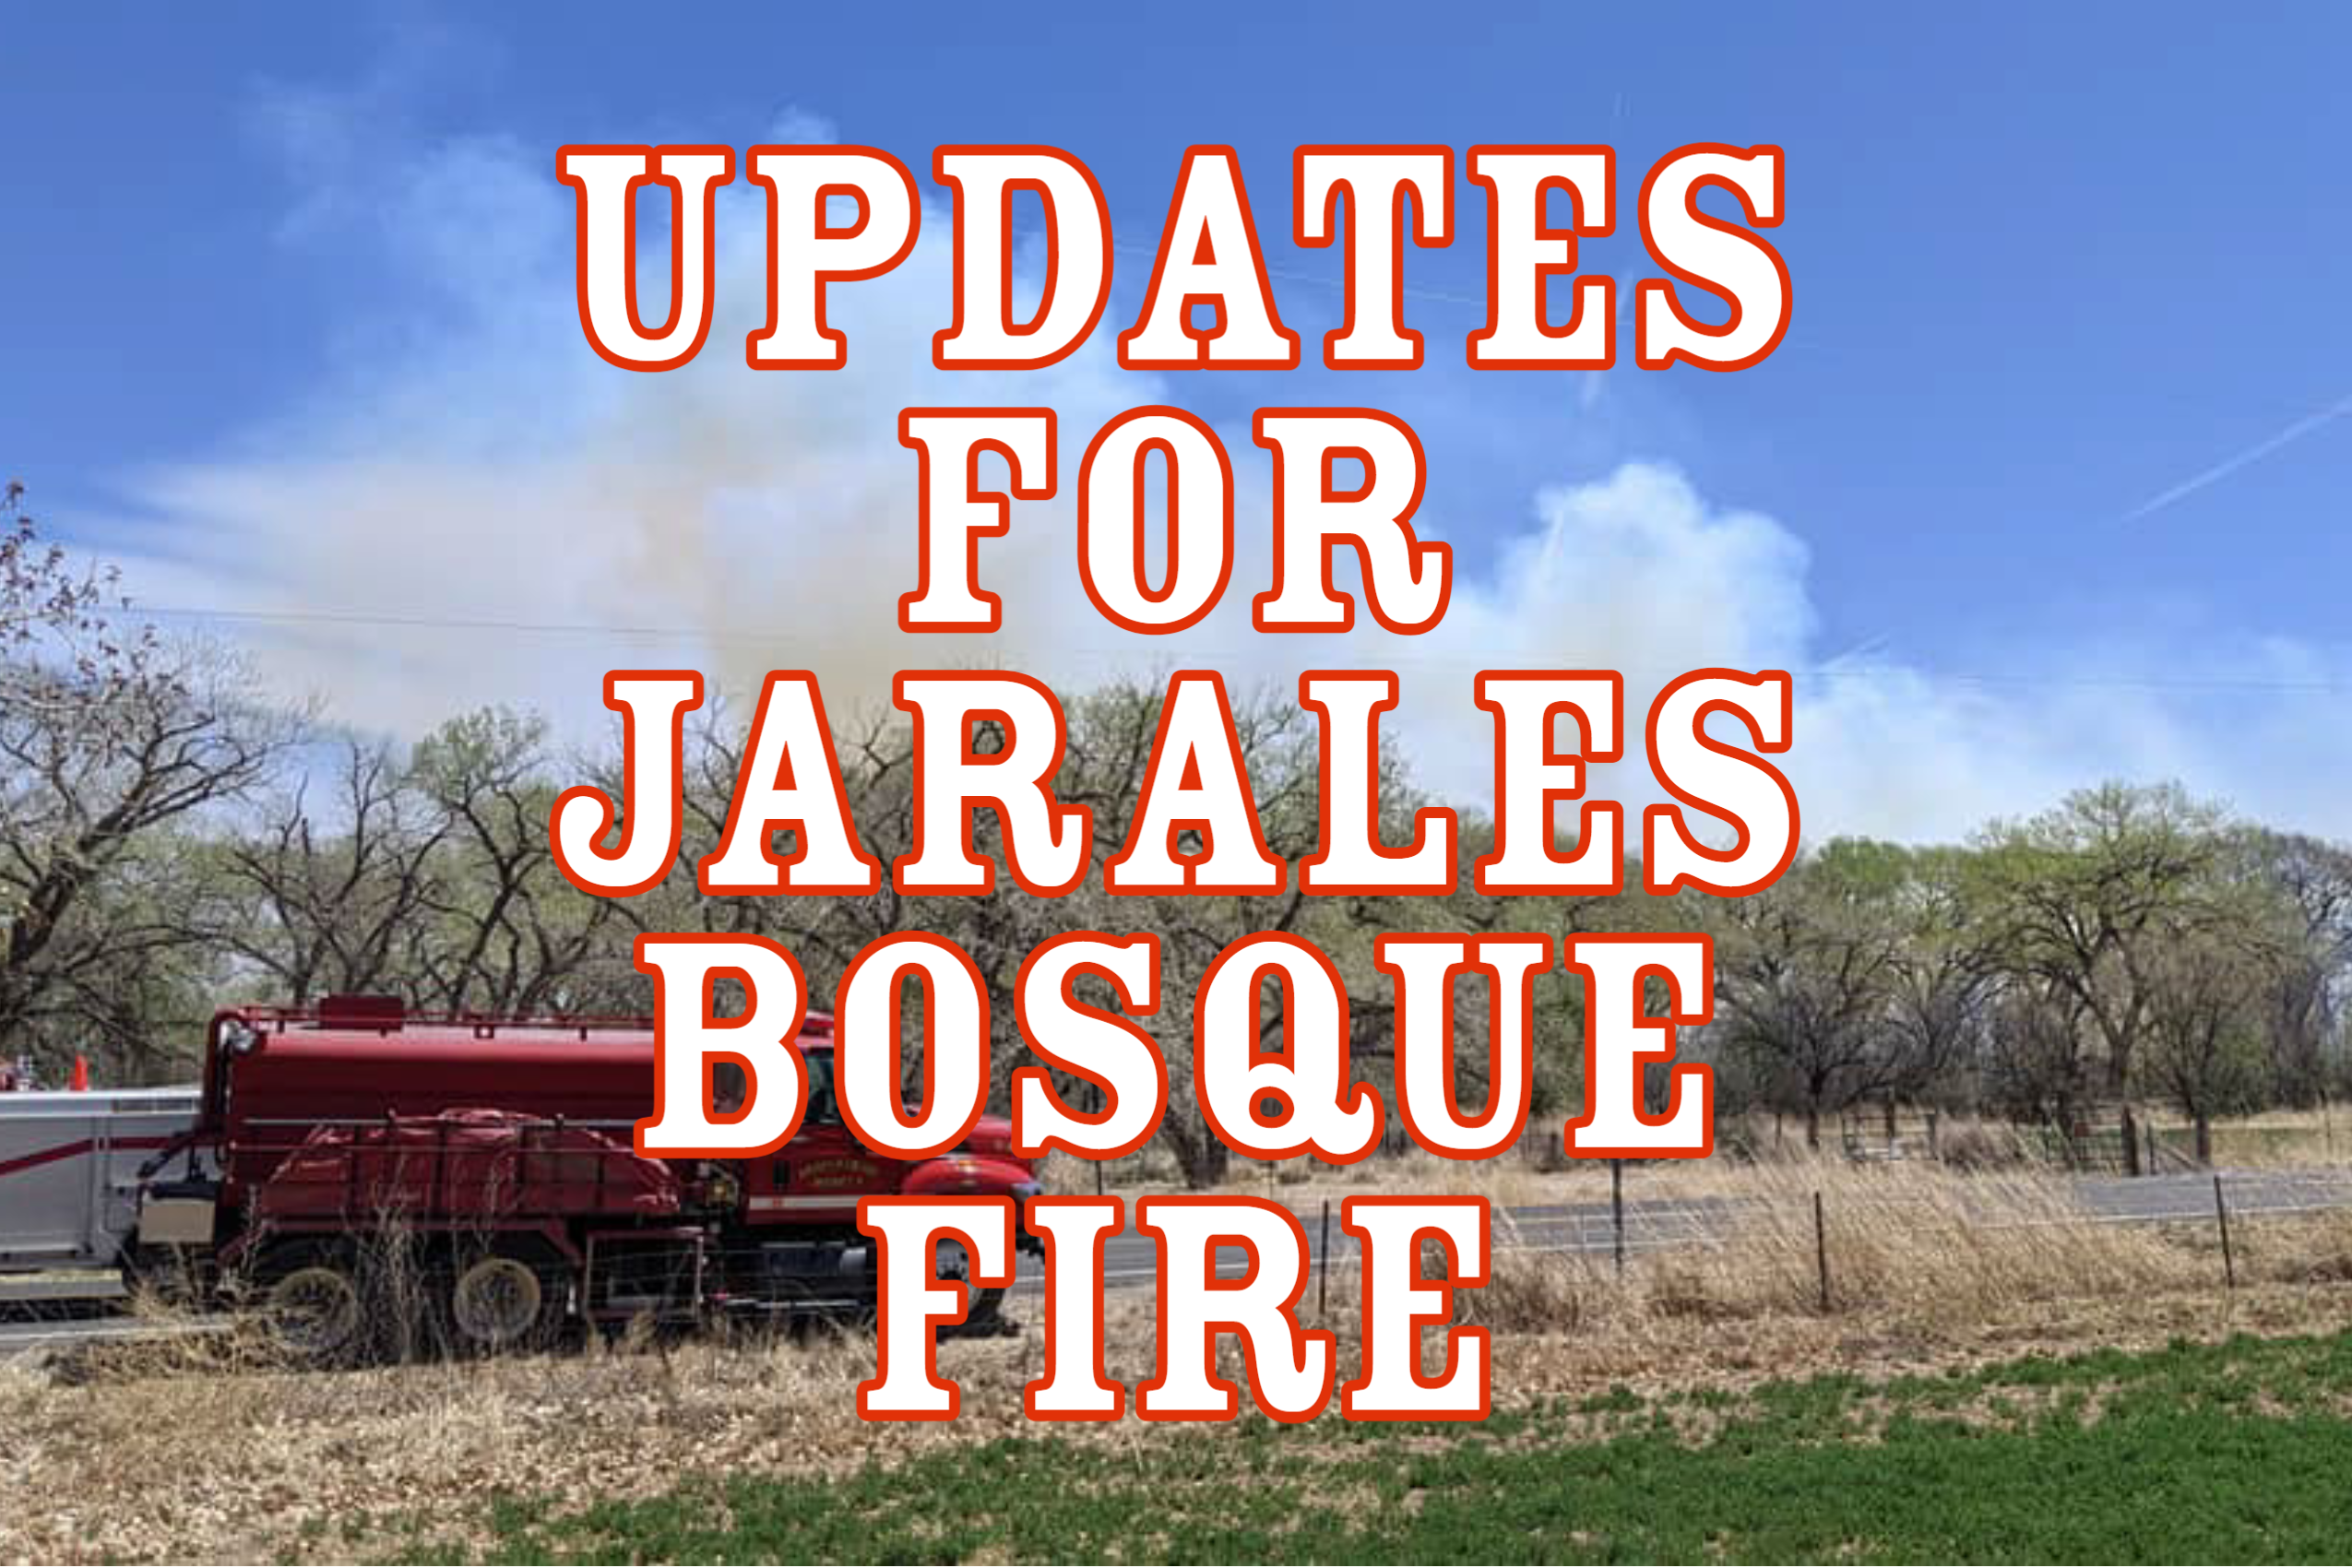 Featured image for “Bosque Fire near Jarales in Valencia County.”